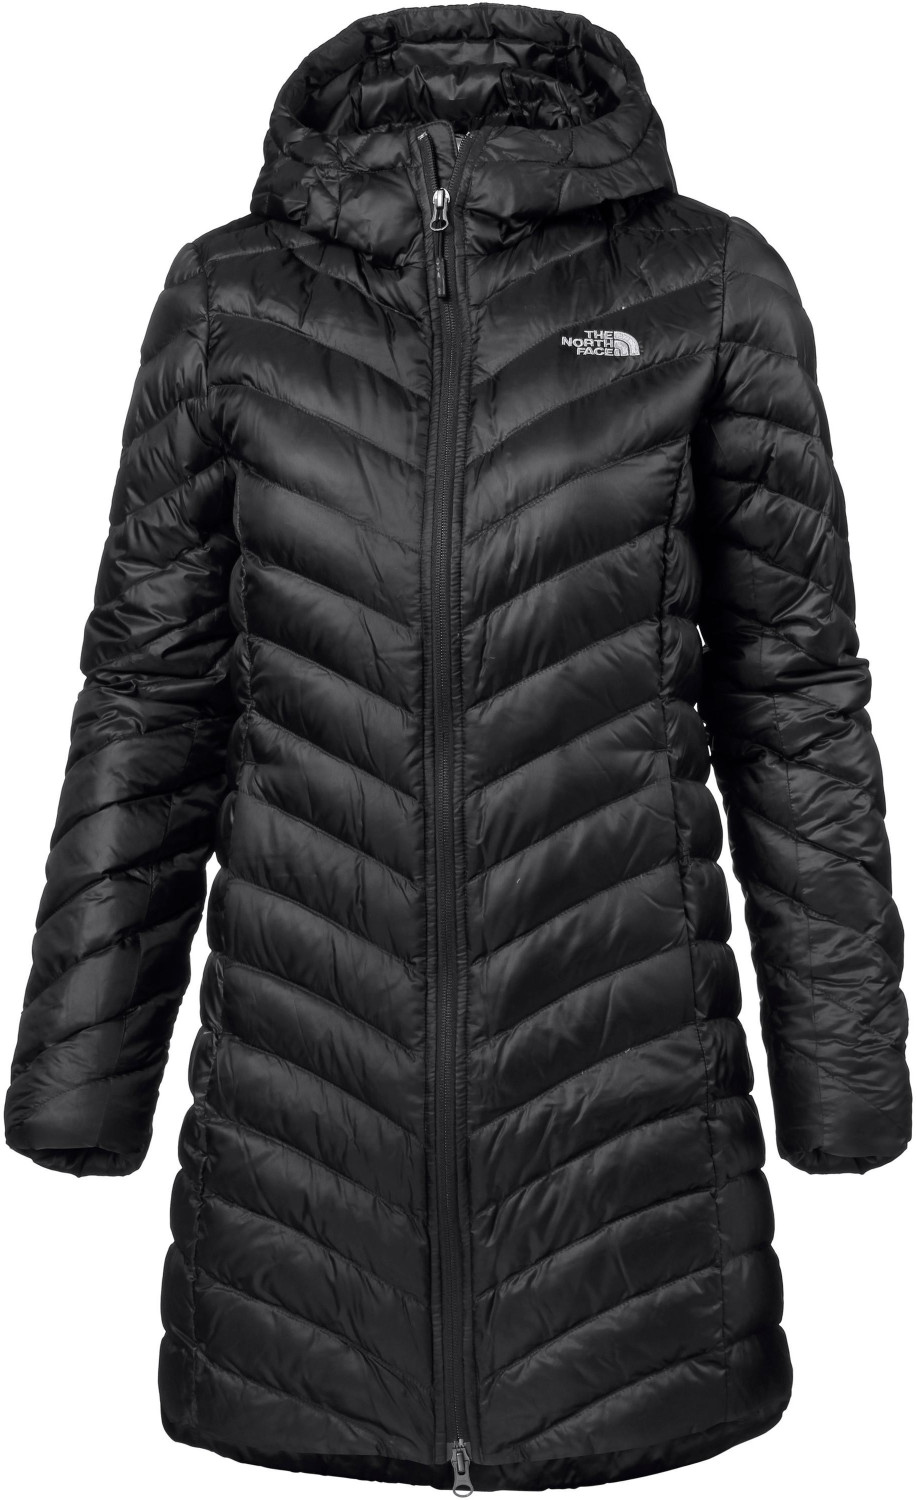 Buy The North Face Trevail Parka Women tnf black from Â£230.00 (Today) â Best Deals on idealo.co.uk